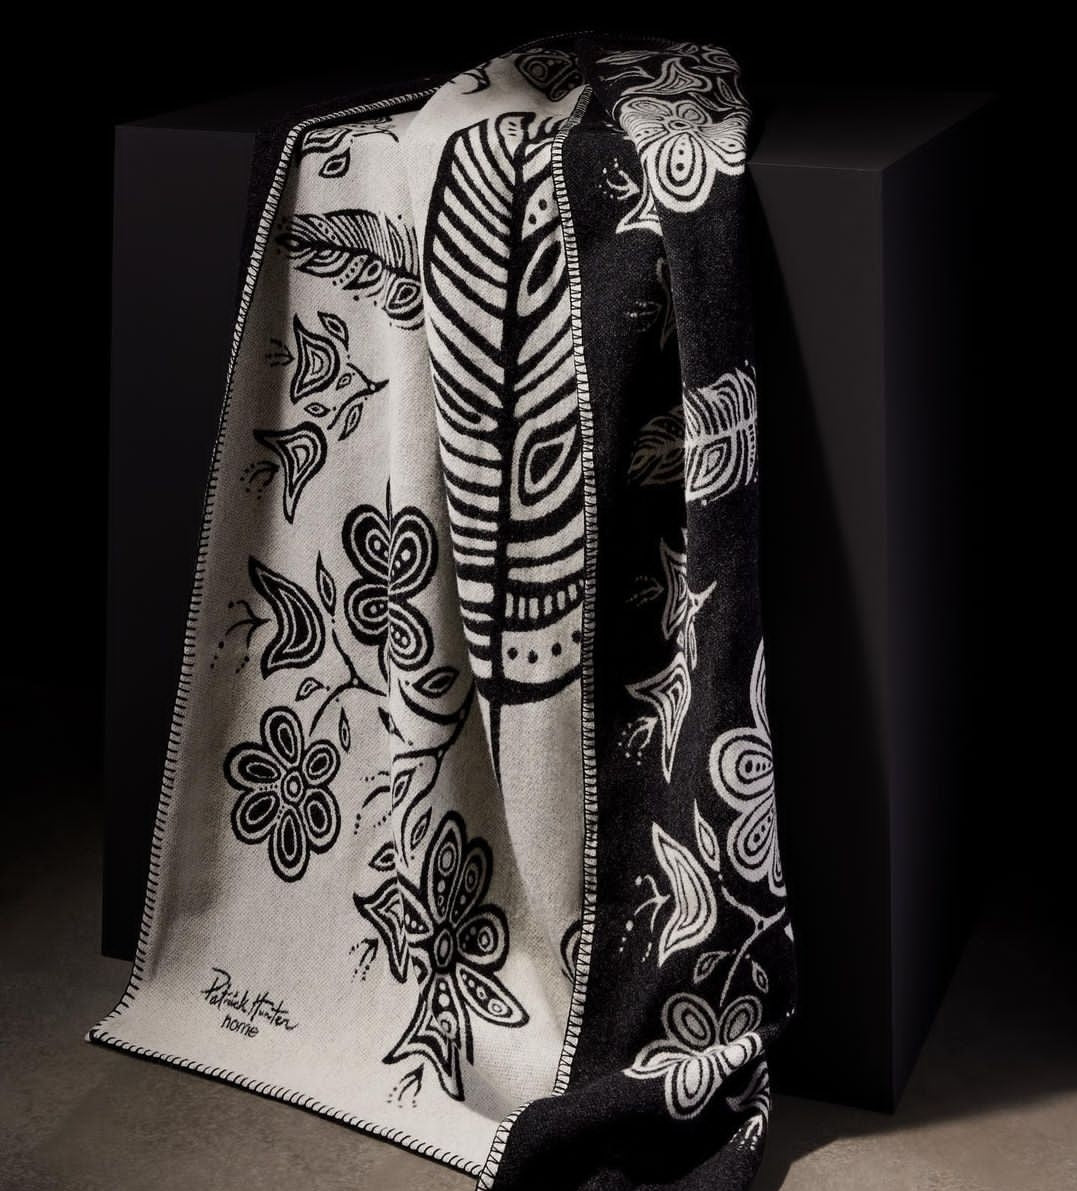 A black and white blanket with woodland style line art by Patrick Hunter is draped over a black surface.